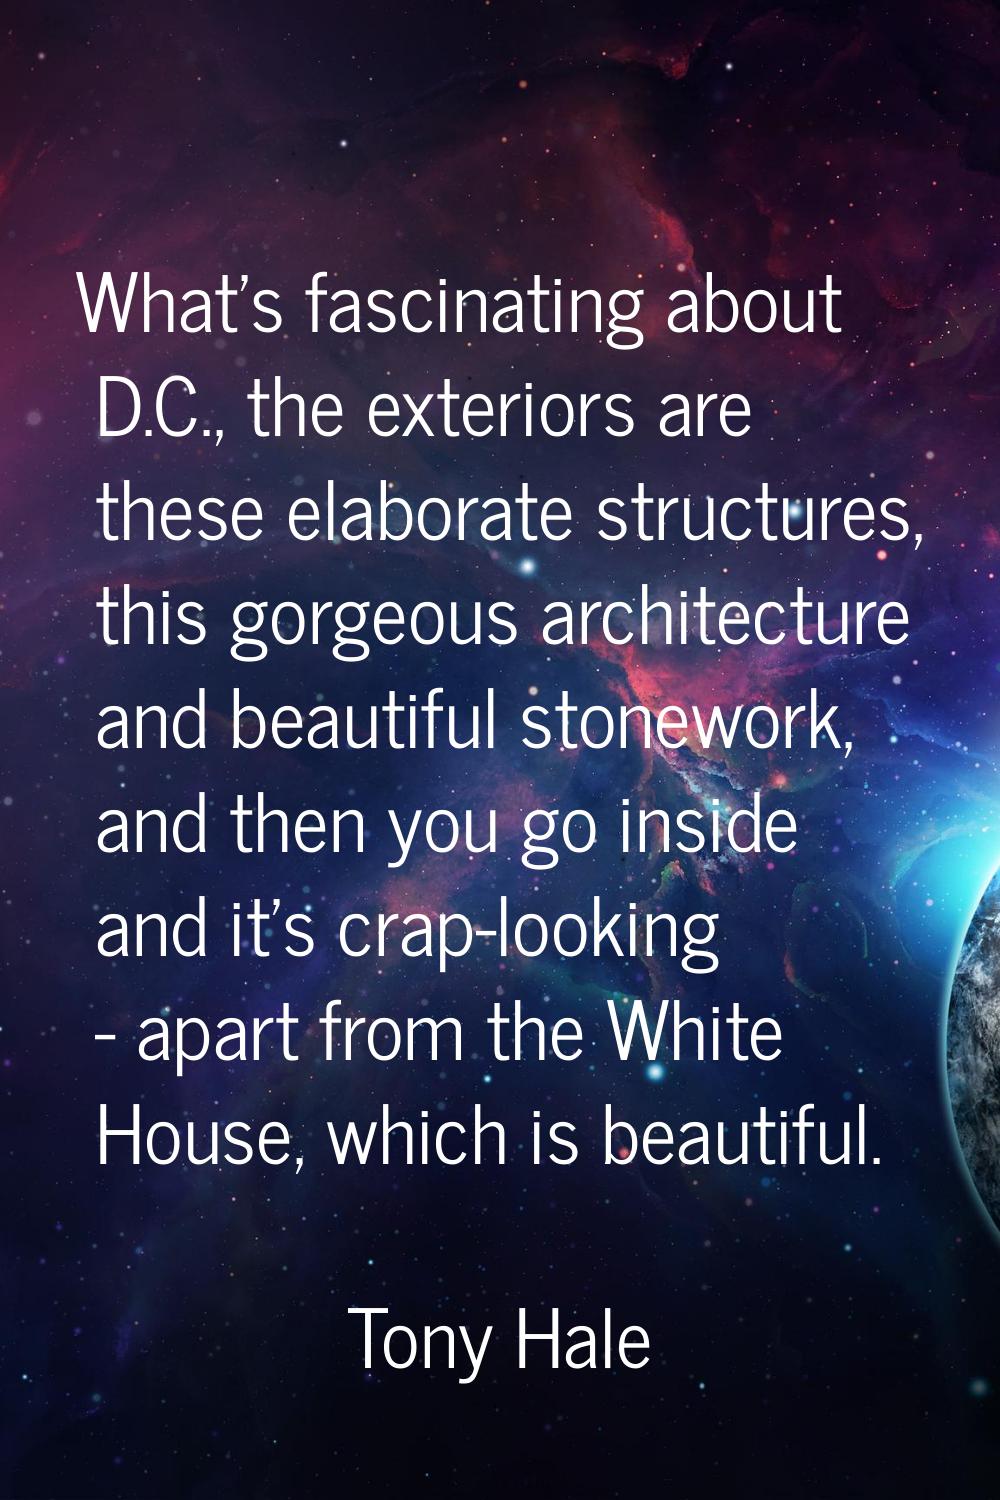 What's fascinating about D.C., the exteriors are these elaborate structures, this gorgeous architec